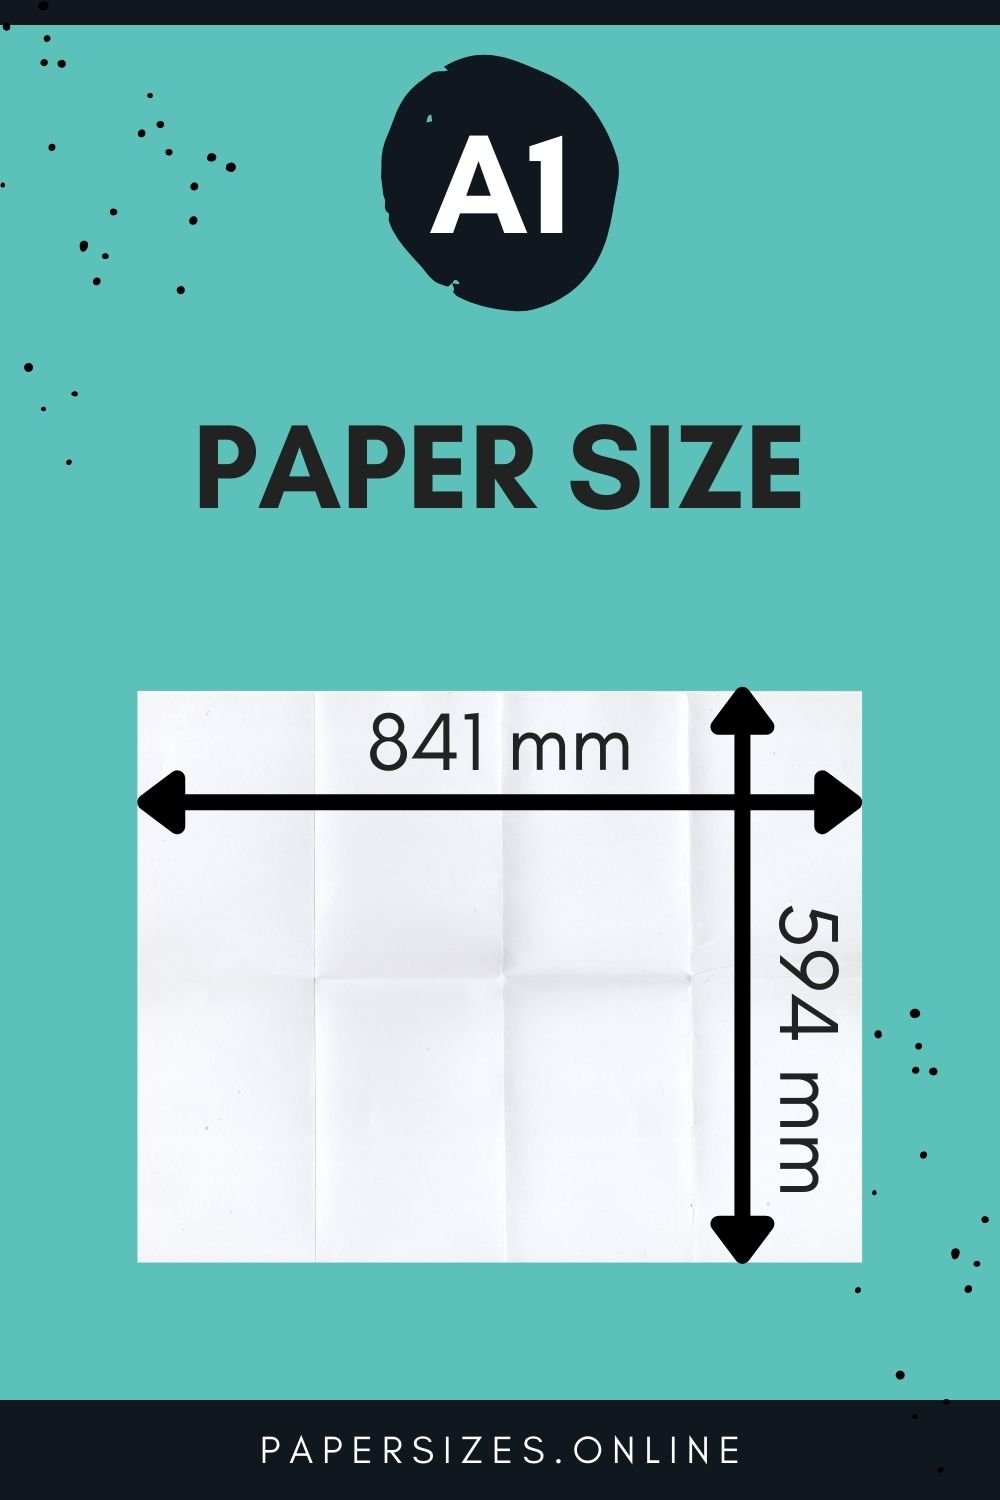 a1-size-in-mm-millimeter-paper-sizes-online